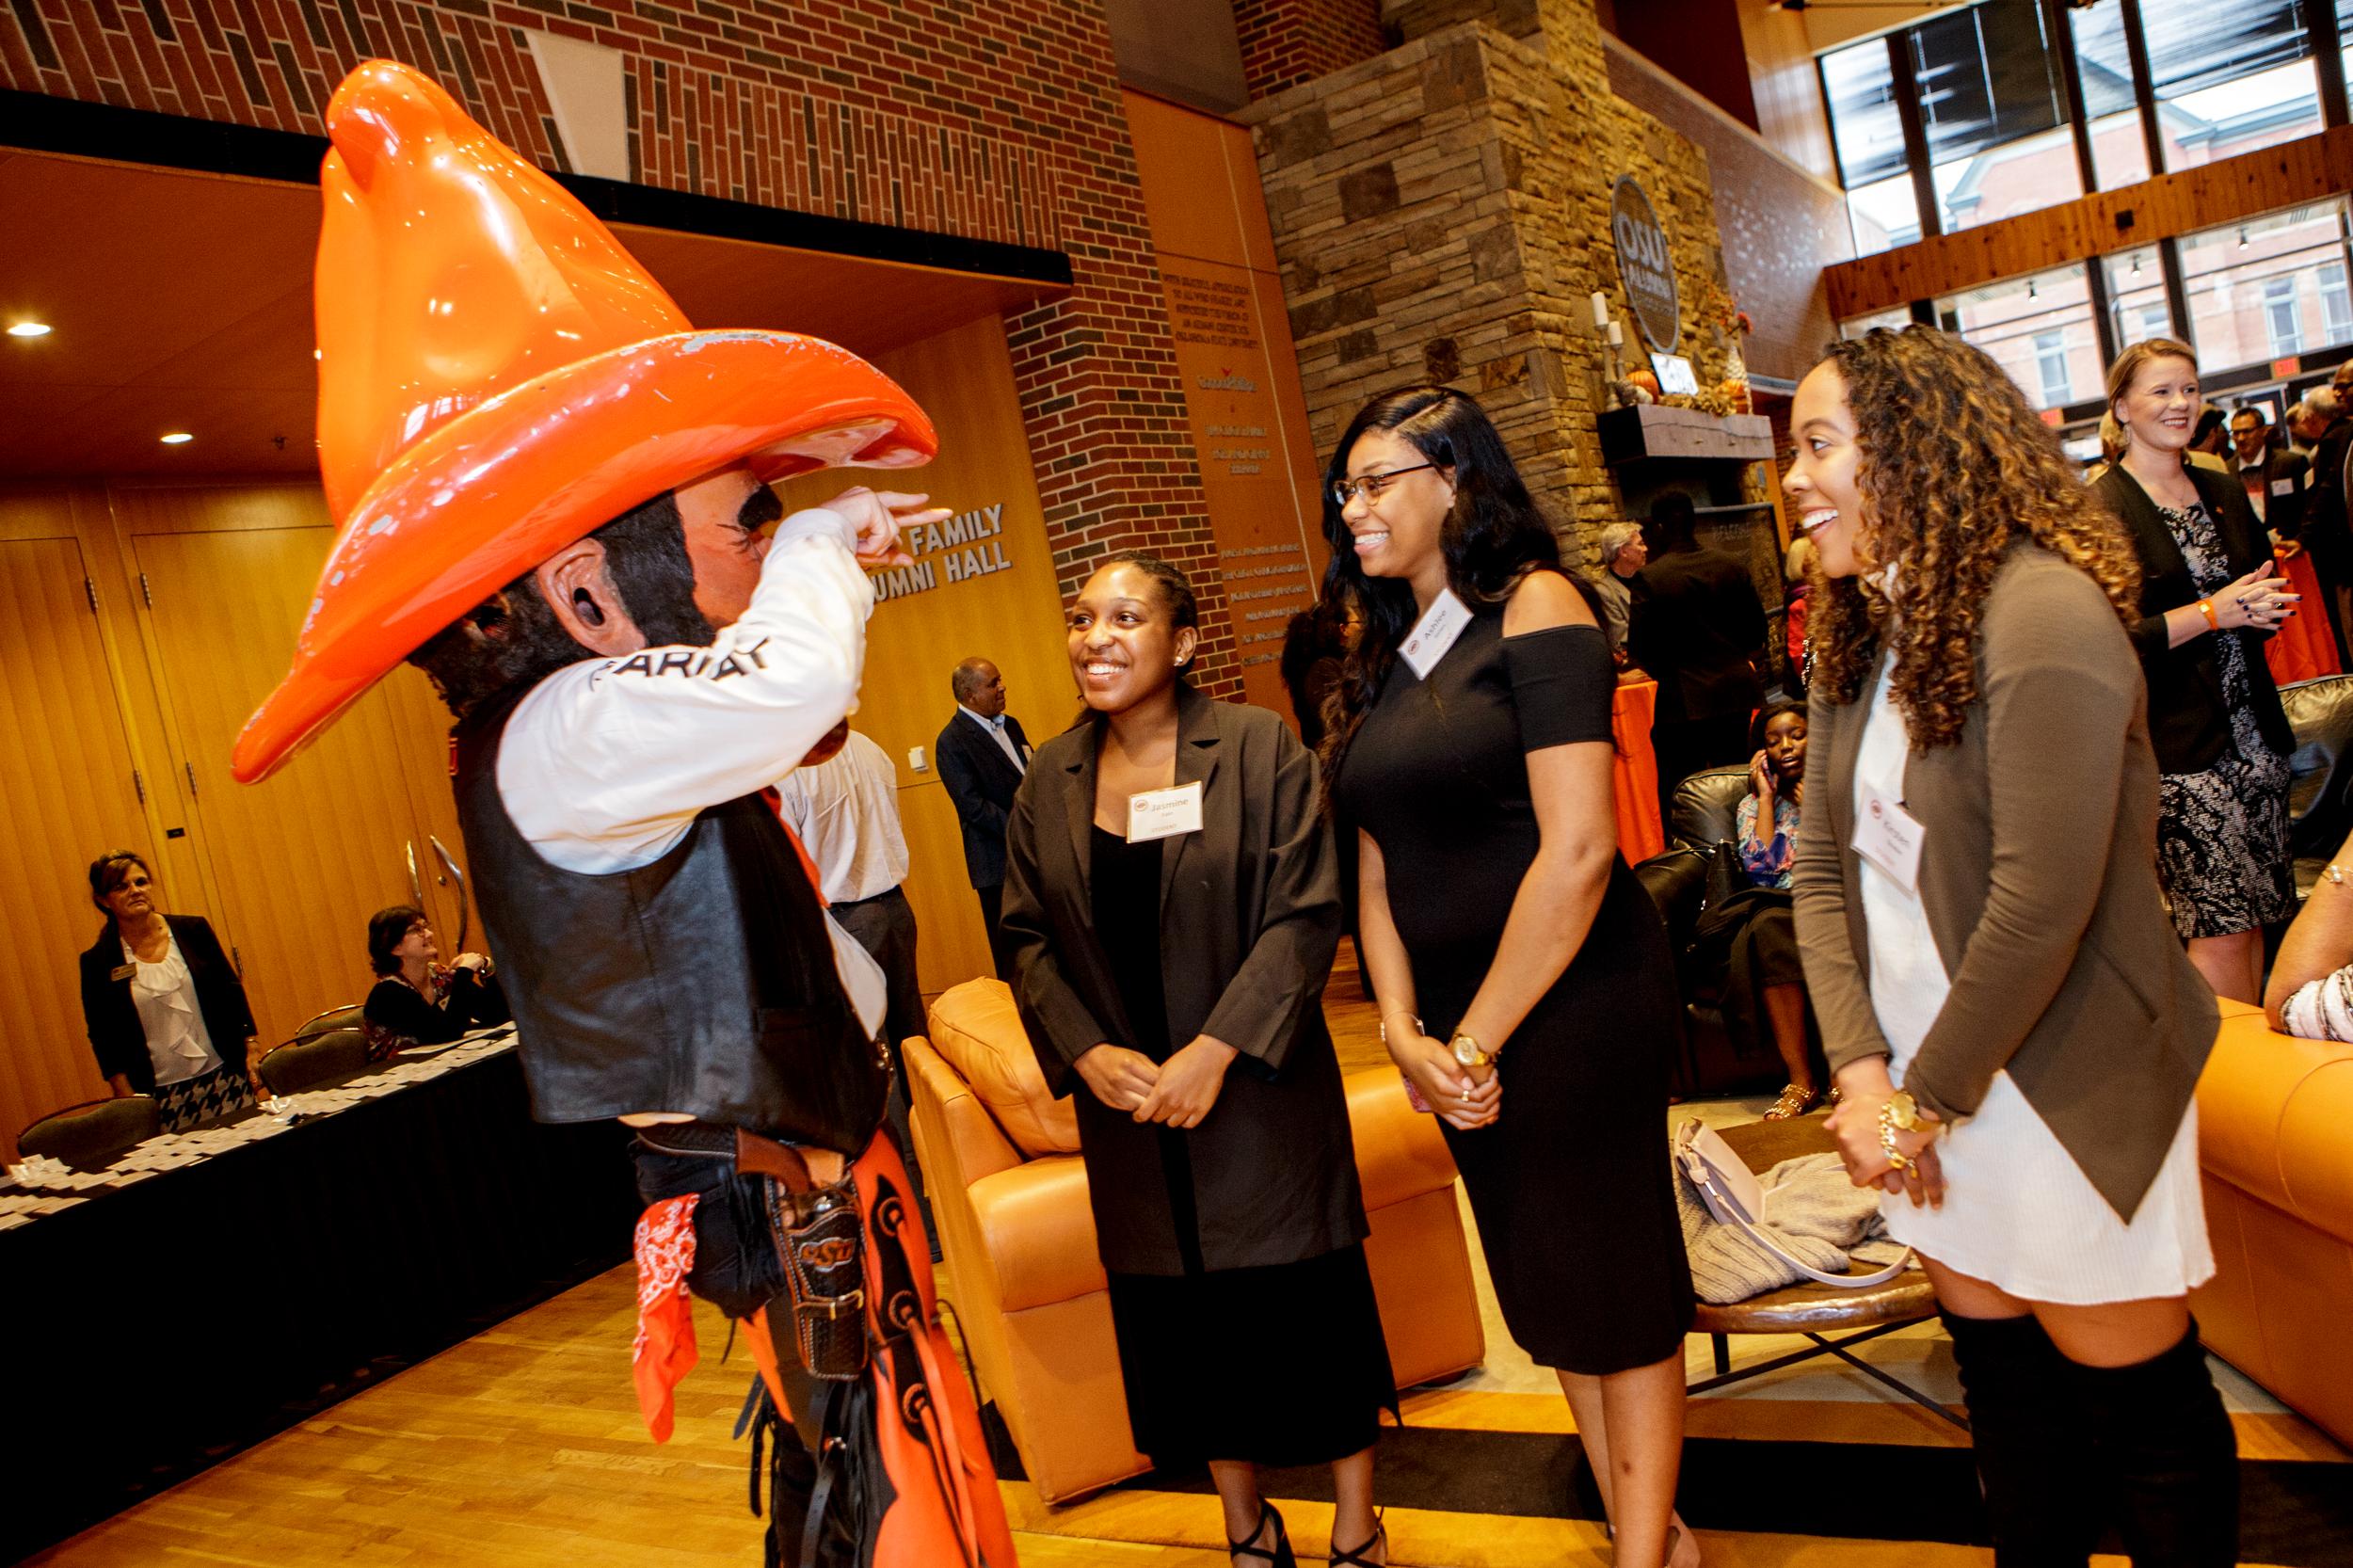 Pistol Pete talk with a group of women at an OSU alumni event.